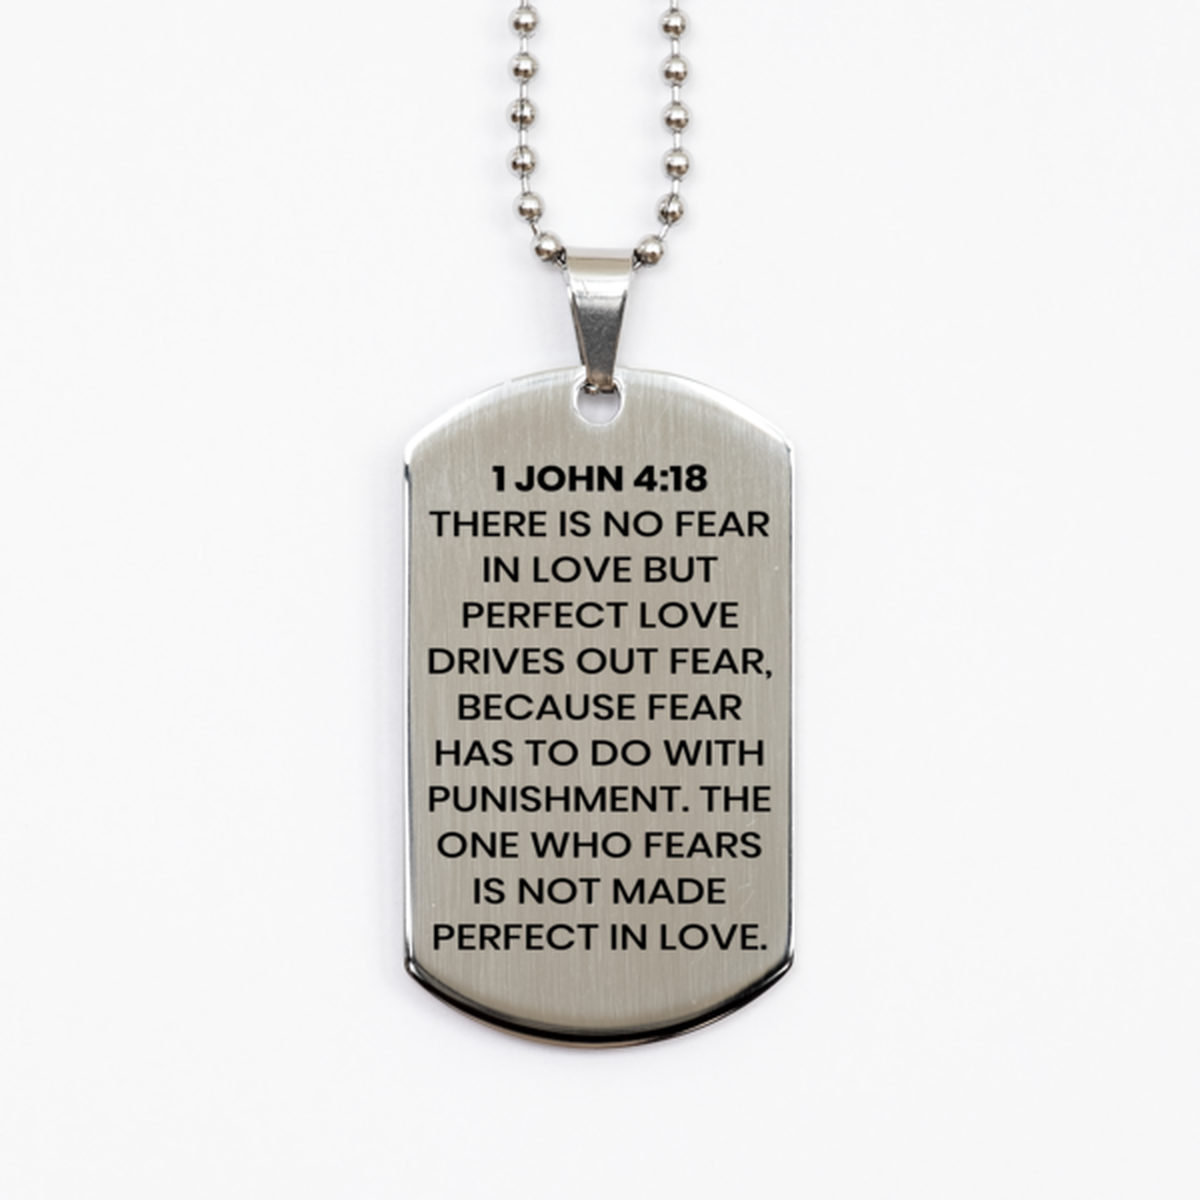 1 John 4:18 Necklace, Bible Verse Necklace, Christian Necklace, Christian Birthday Gift, Stainless Steel Dog Tag Necklace, Gift for Christian.